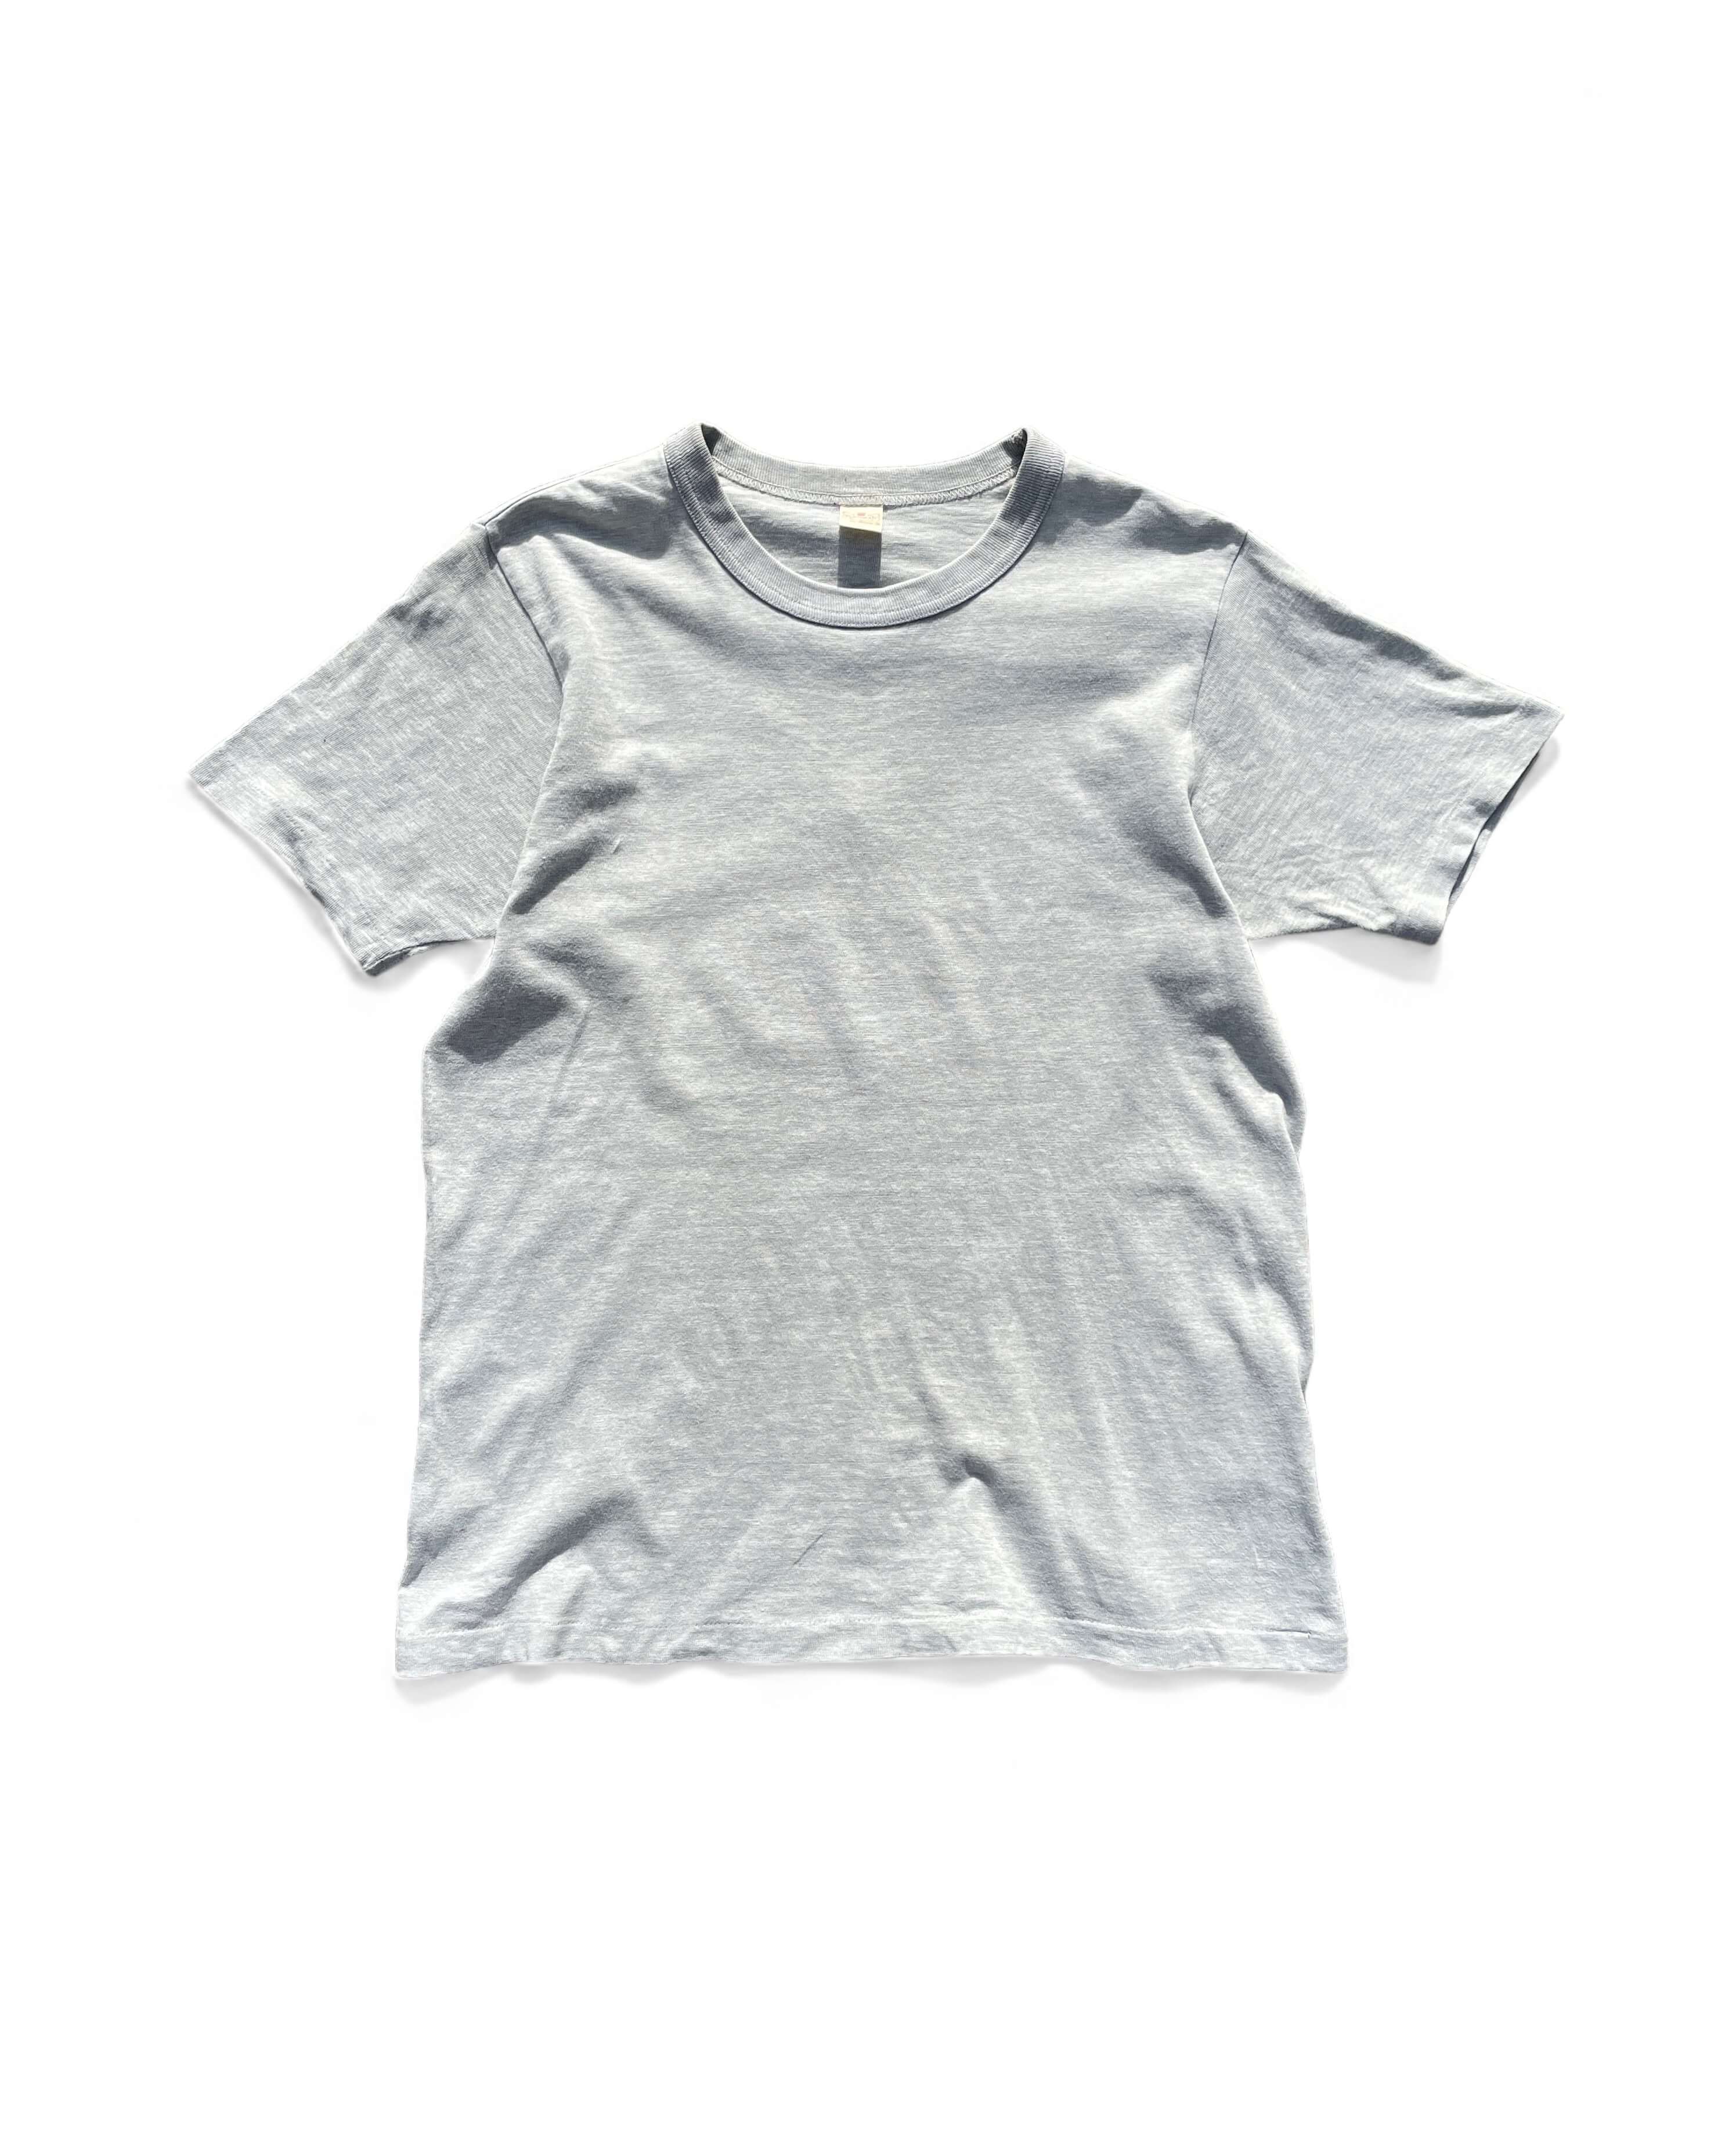 The Flat Head Collier&#039;s T-shirts